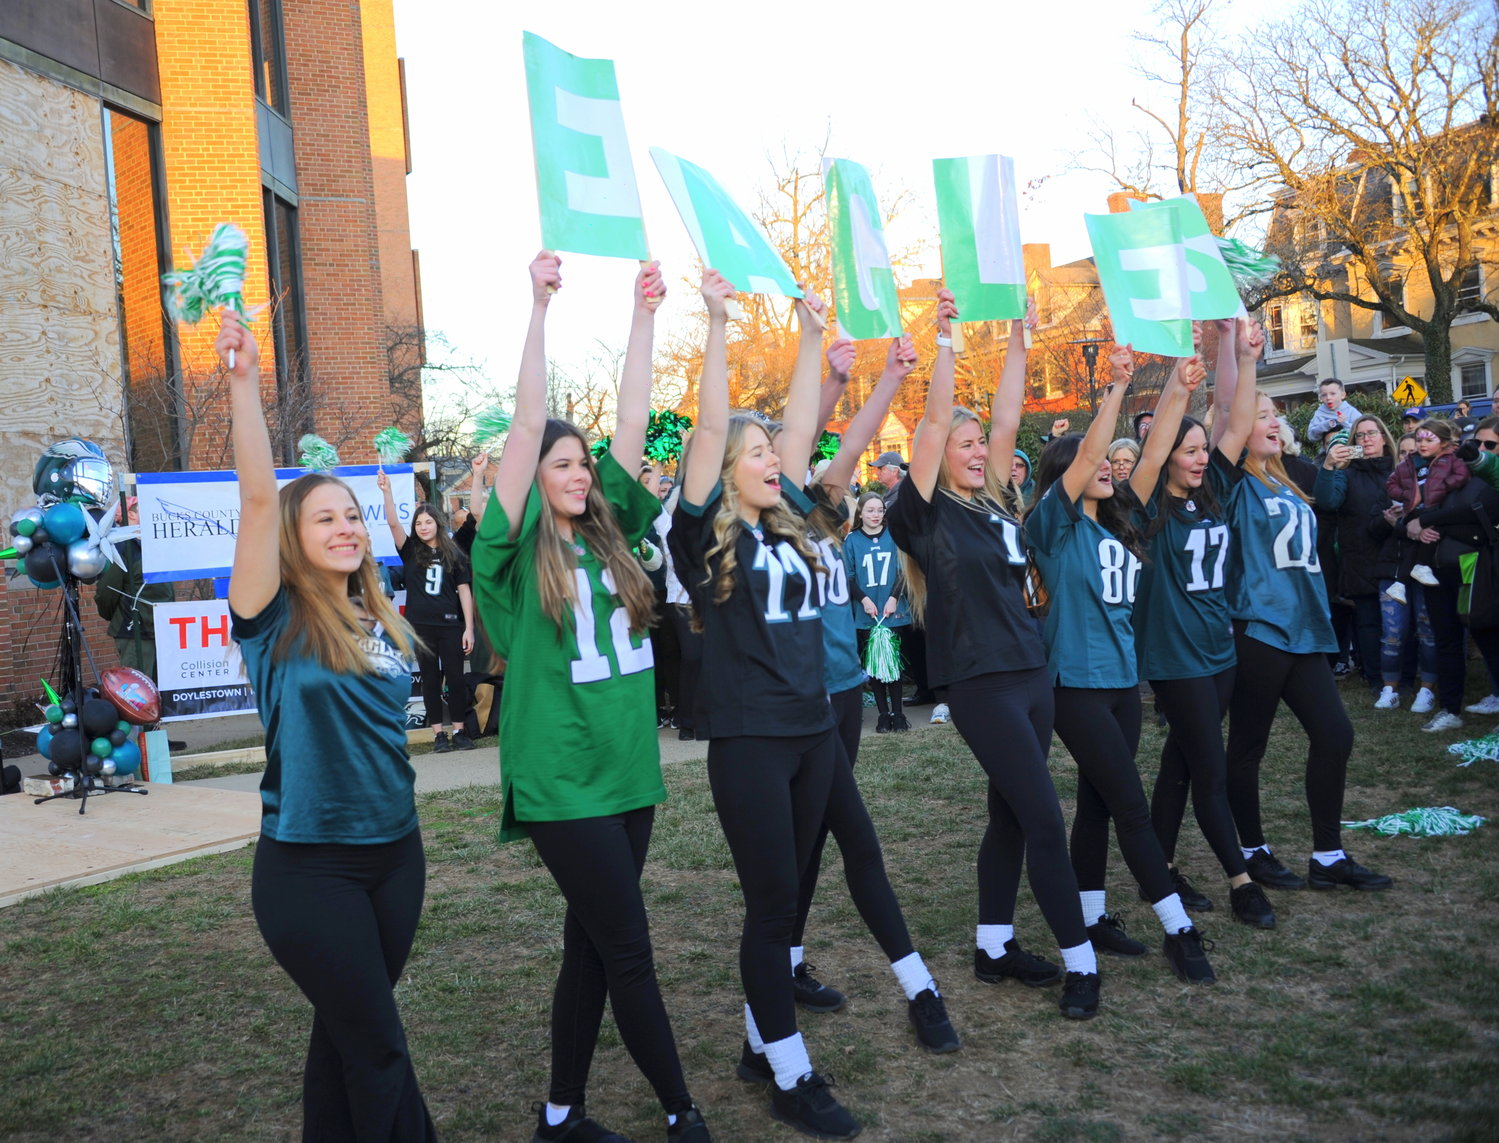 Members of the Fitzpatrick School of Irish Dance lead the crowd in an “E-A-G-L-E-S Eagles!” chant during their Friday night performance at the Herald’s “Bucks County Loves the Birds” pep rally on the lawn of the old county courthouse in Doylestown.